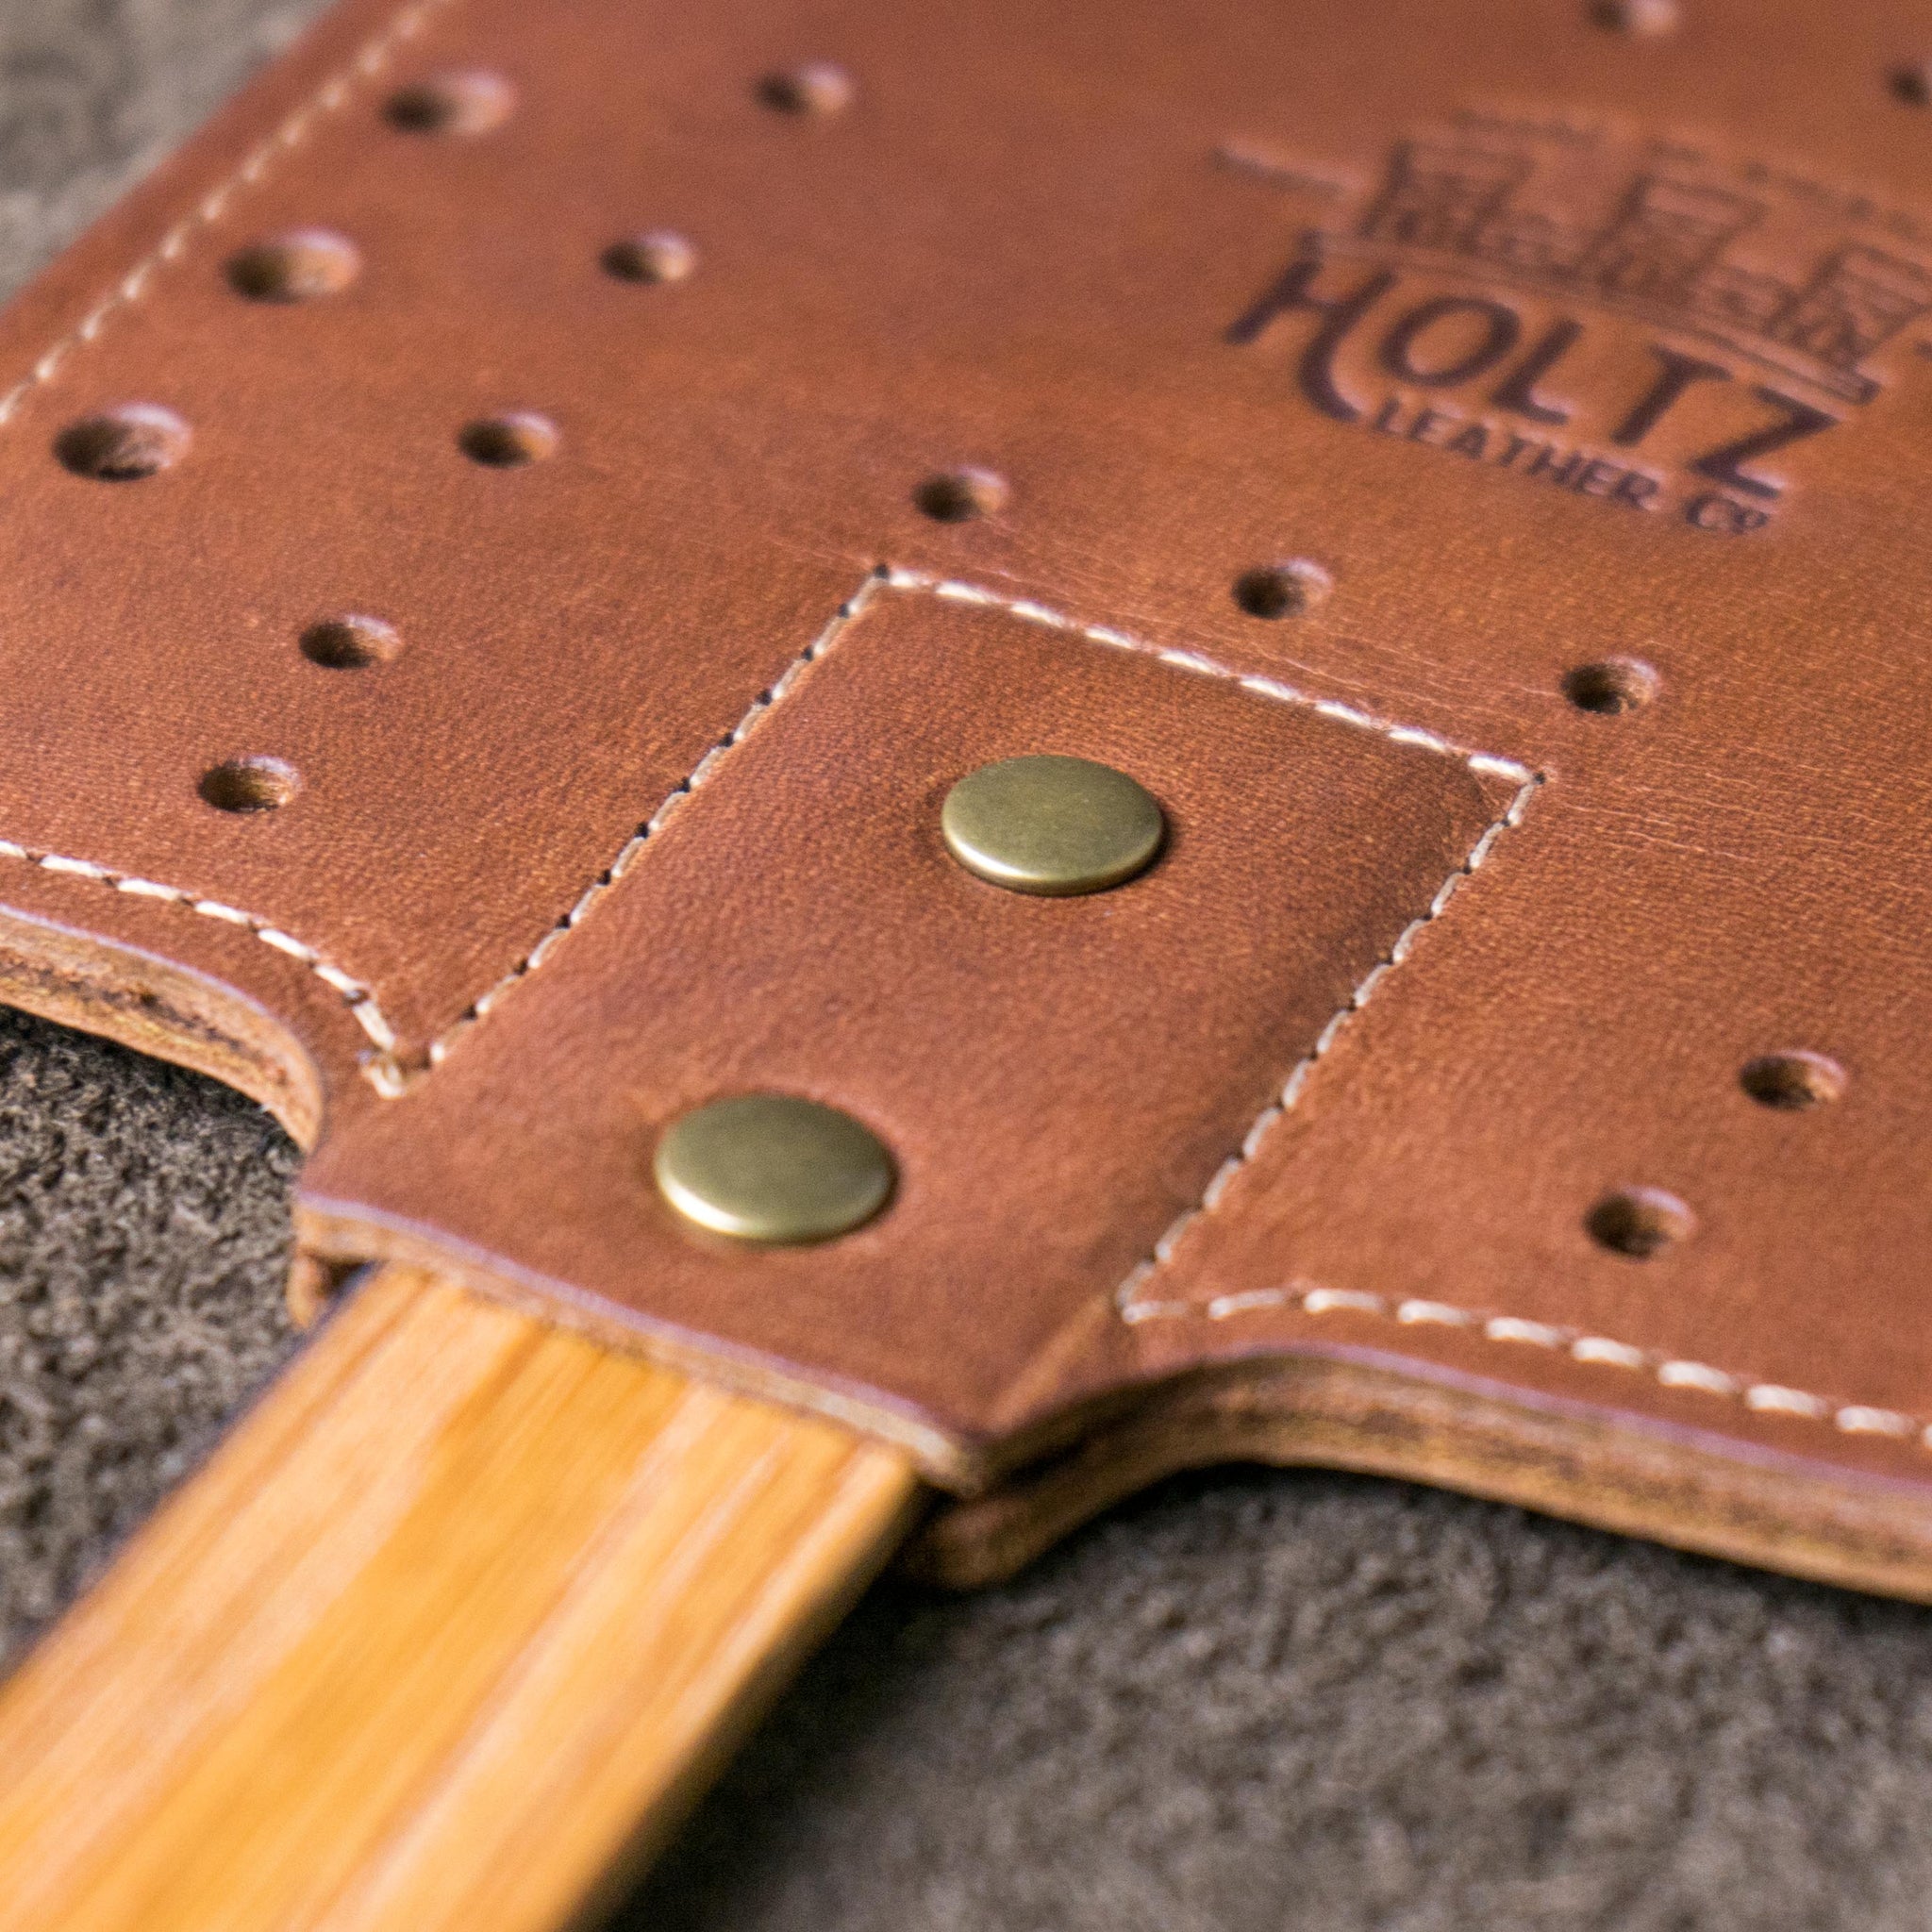 Top 20 Best Gifts for Daughters - Holtz Leather